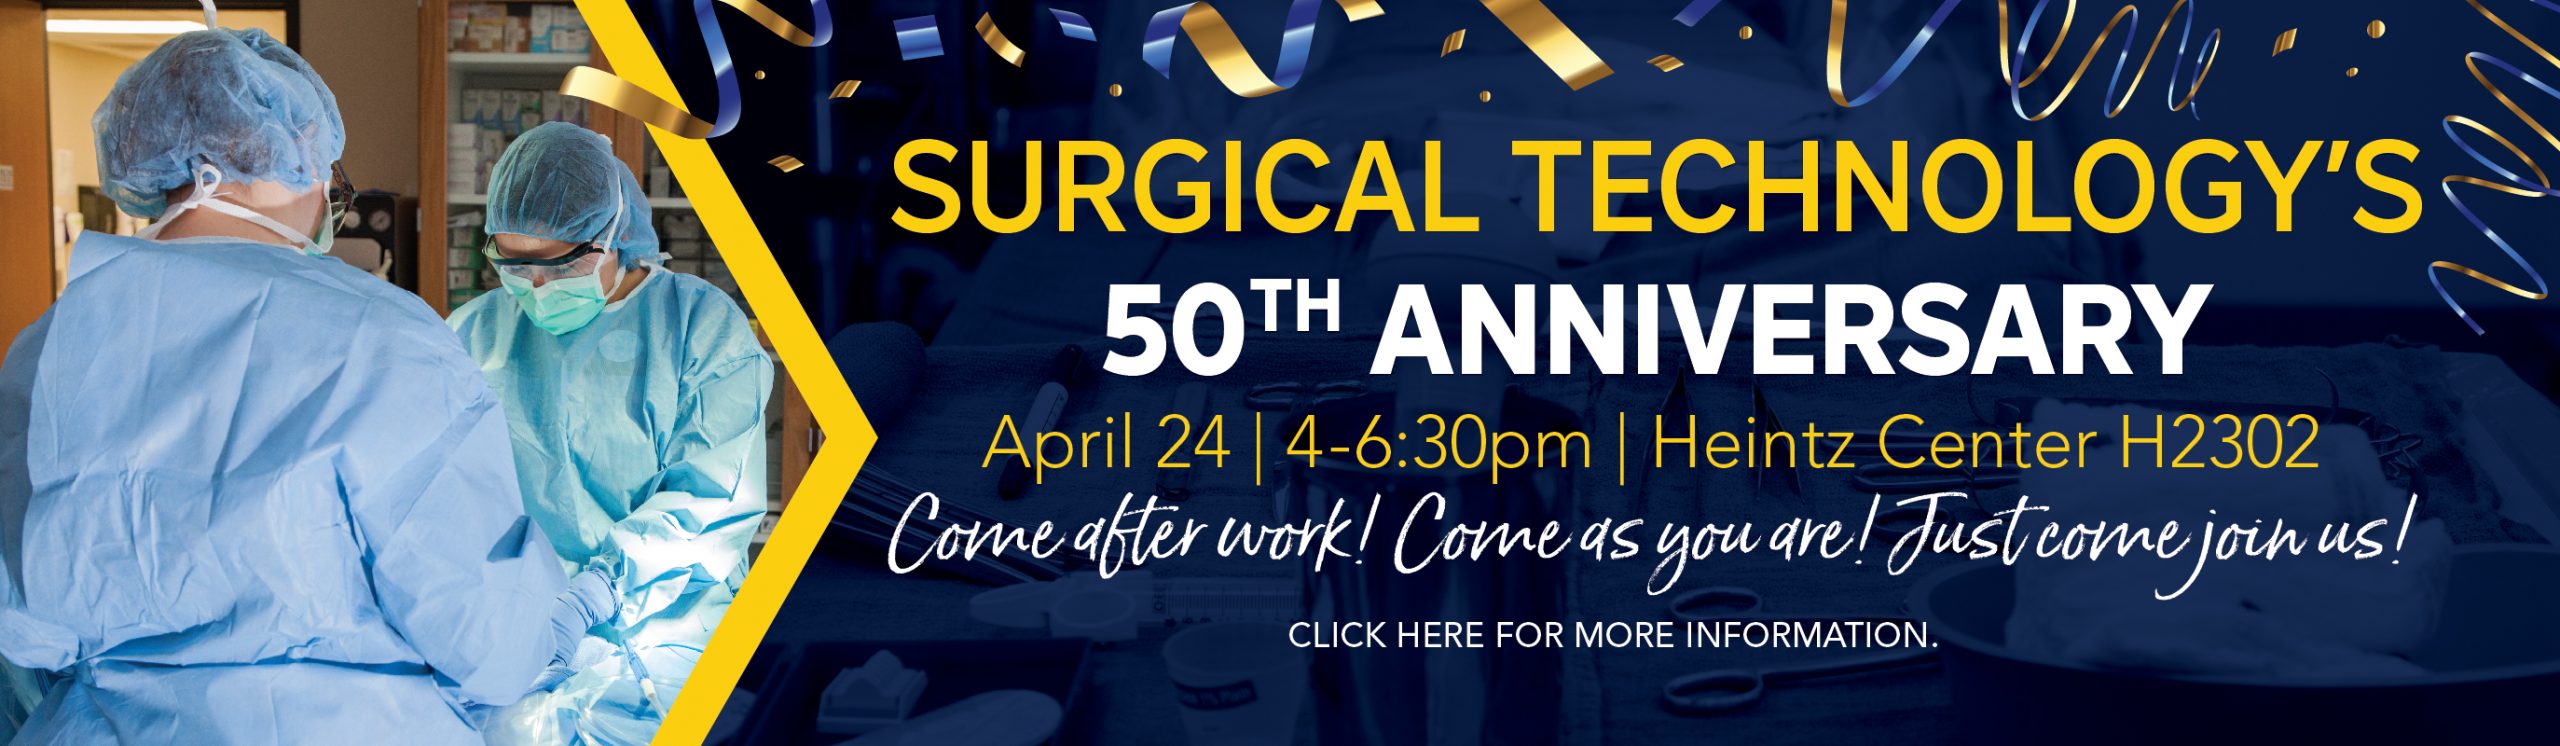 Surgical Technology Program's 50th Anniversary